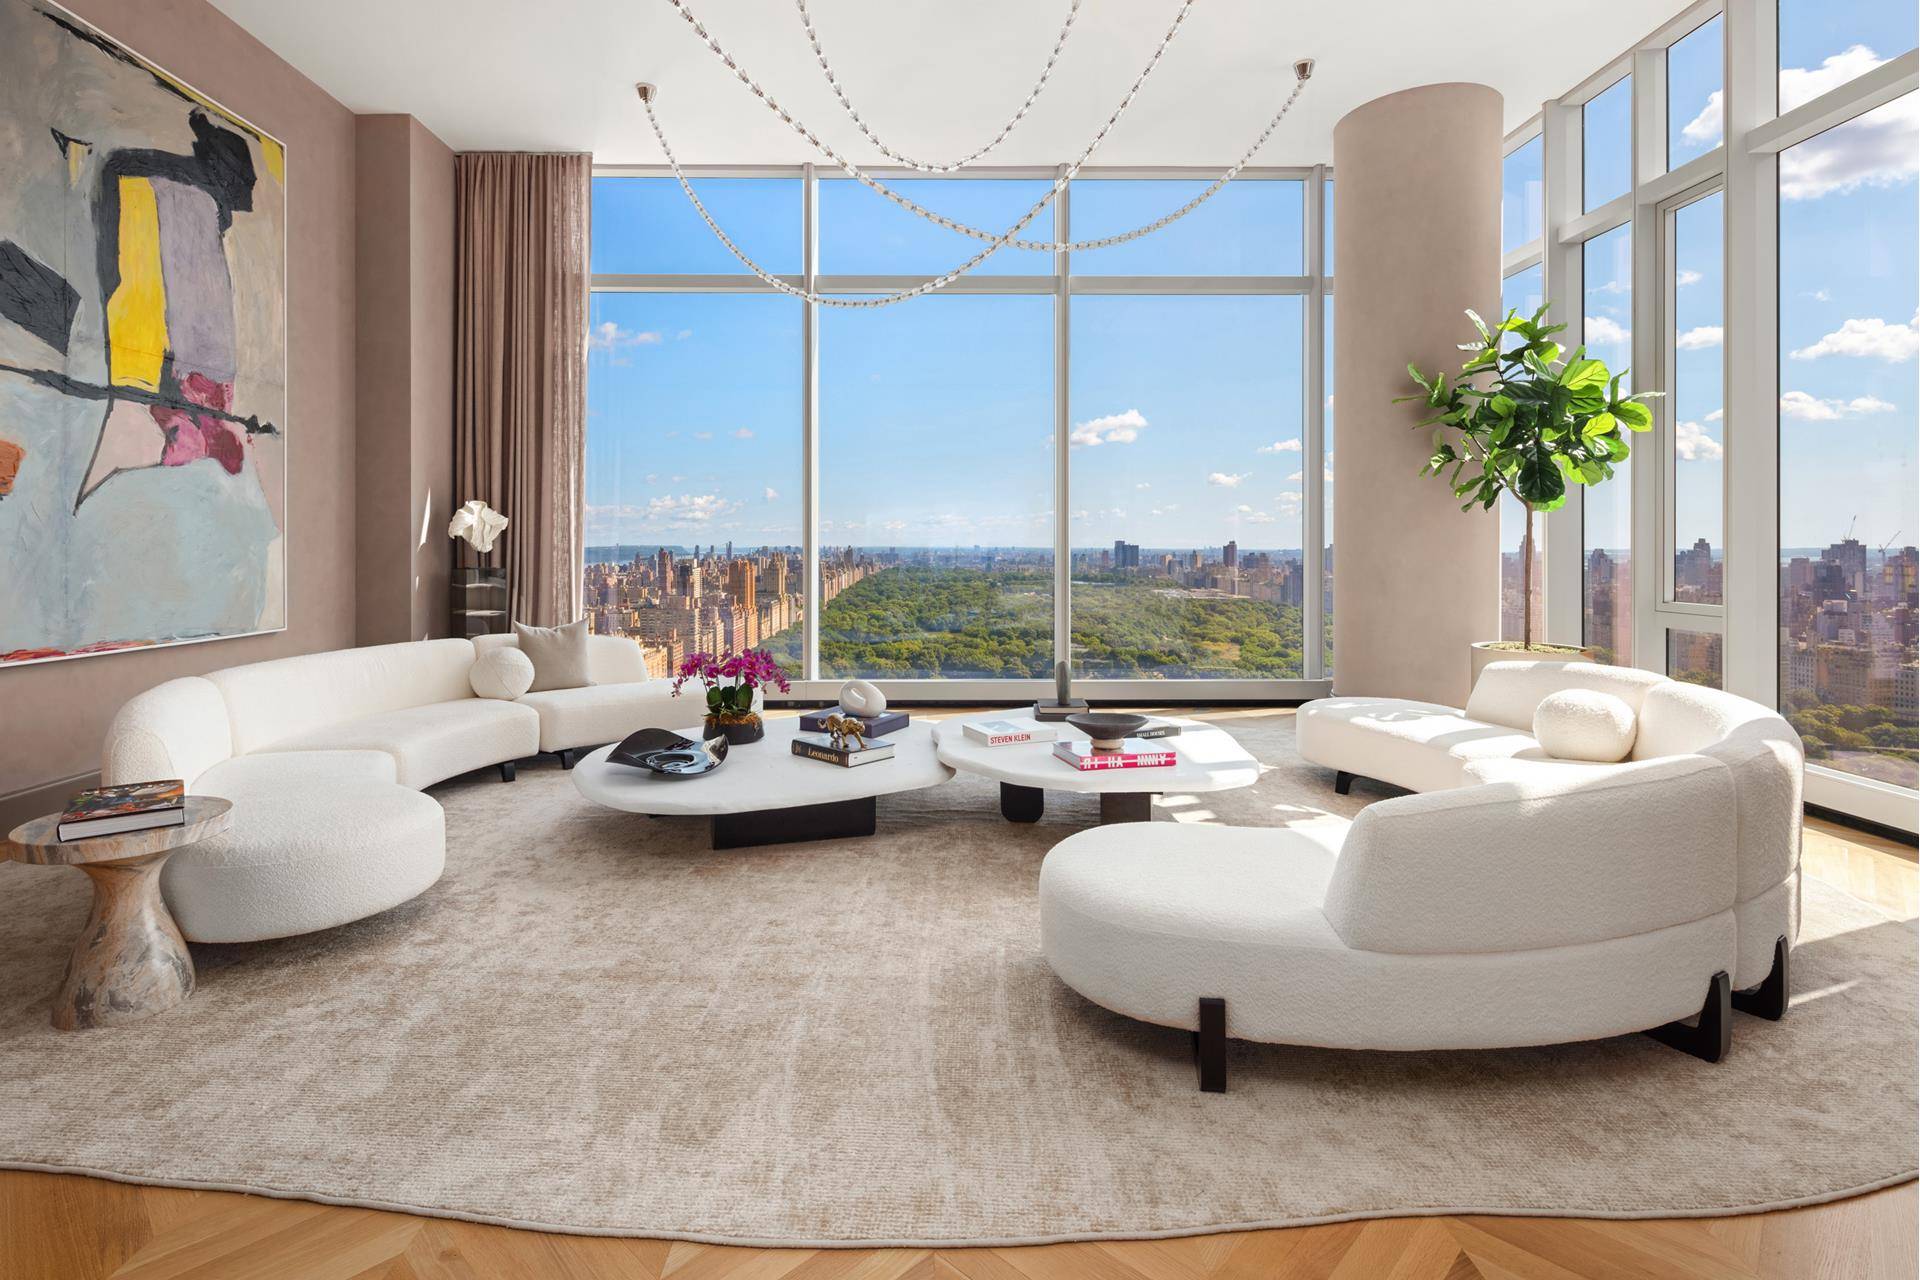 Soaring above the vibrant tapestry of New York City sits residence 39B at Central Park Tower, a remarkable 7, 587 square foot sanctuary offering unparalleled luxury and breathtaking cityscapes.